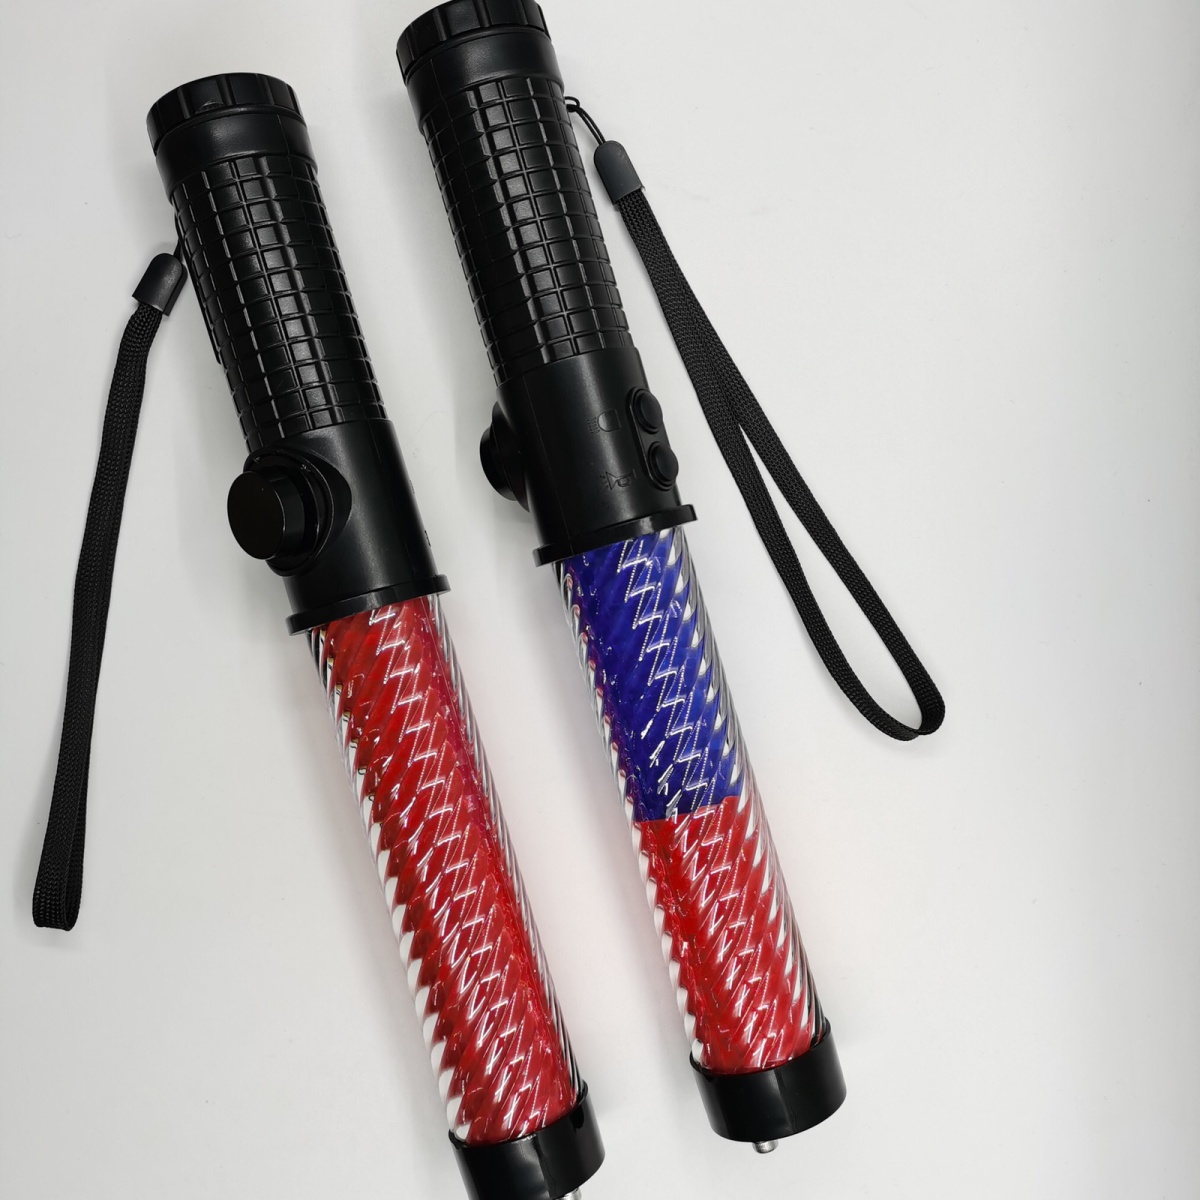 https://img.kwcdn.com/product/flashing-baton-fluorescent-stick-traffic-accident-warning-stick-magnetic-suction-light-stick/d69d2f15w98k18-3ec162ae/visage/image/1668362697436/1641735245650506178.png?imageView2/2/w/500/q/60/format/webp